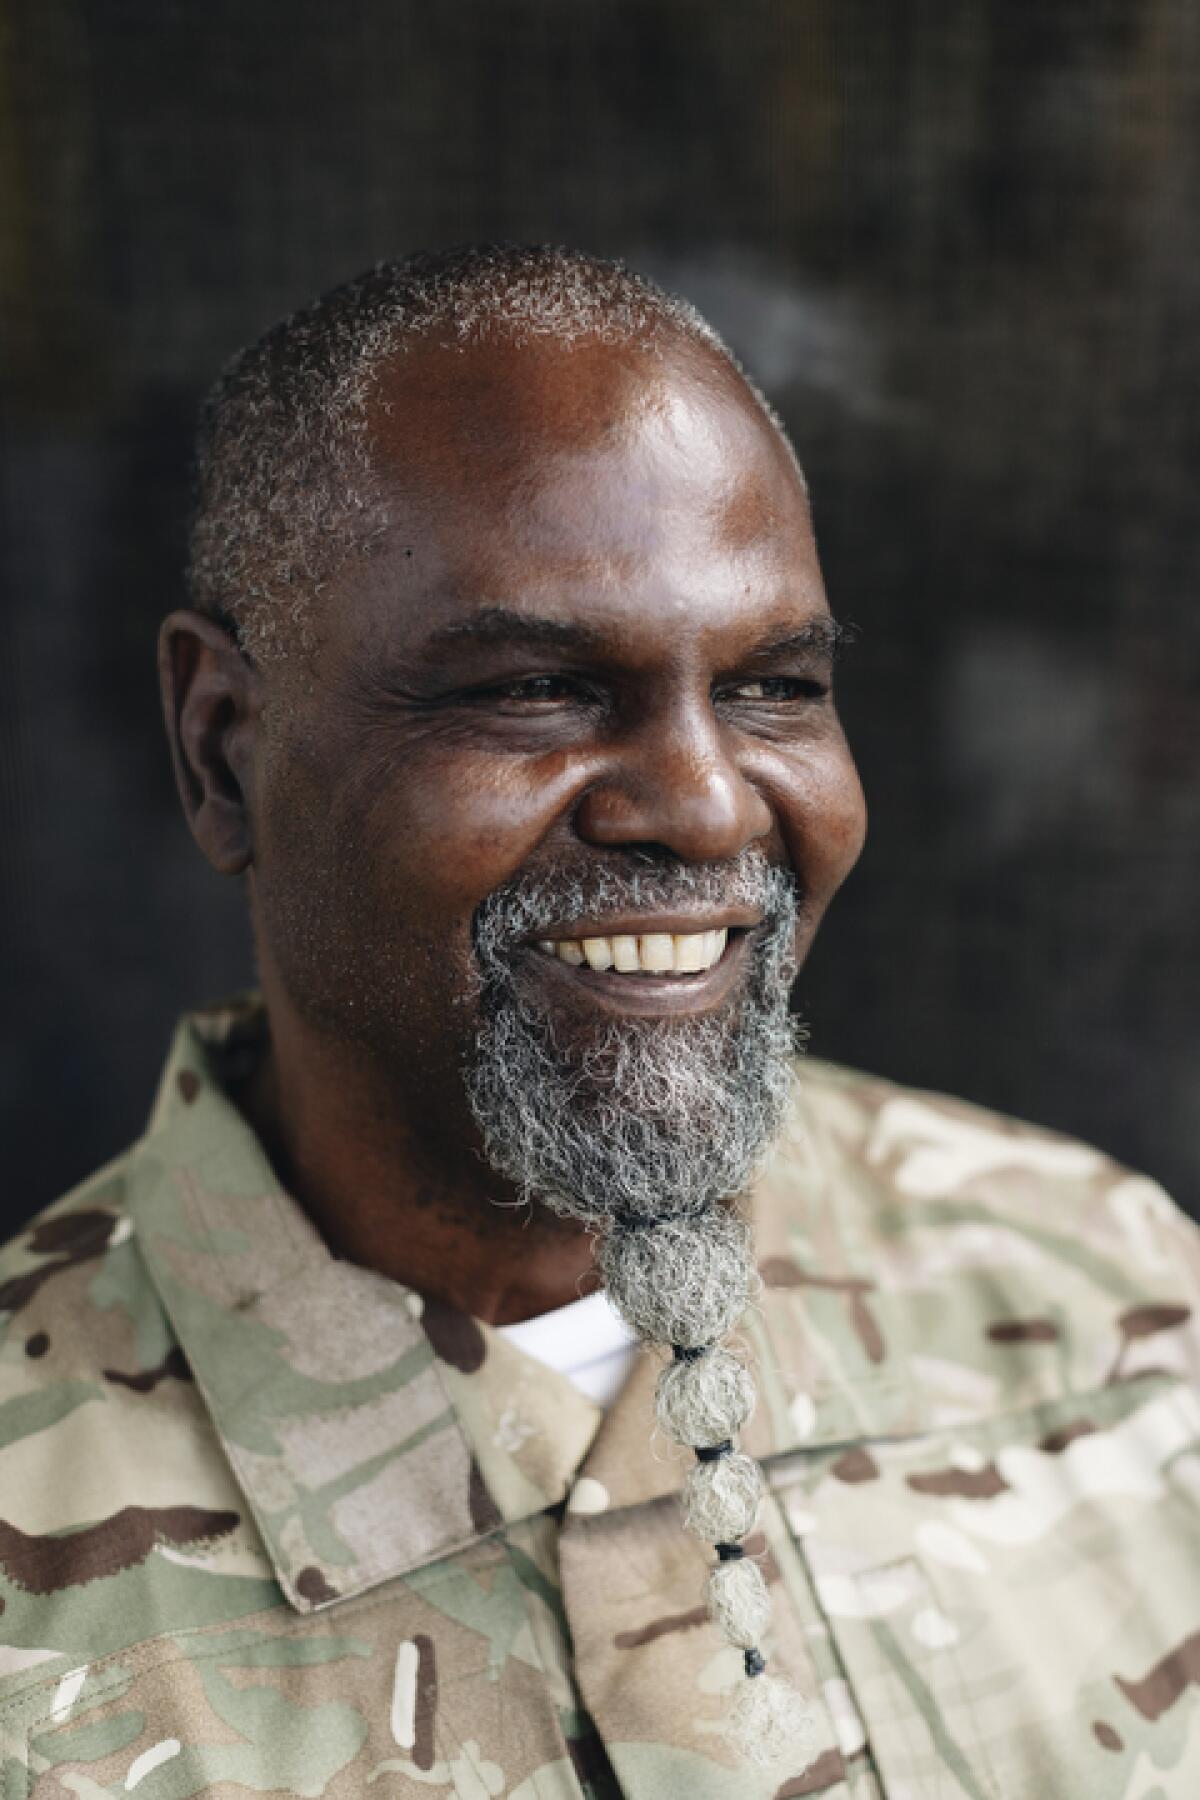 A vertical portrait shows a smiling Black man with a long beard that has been tied into a point.